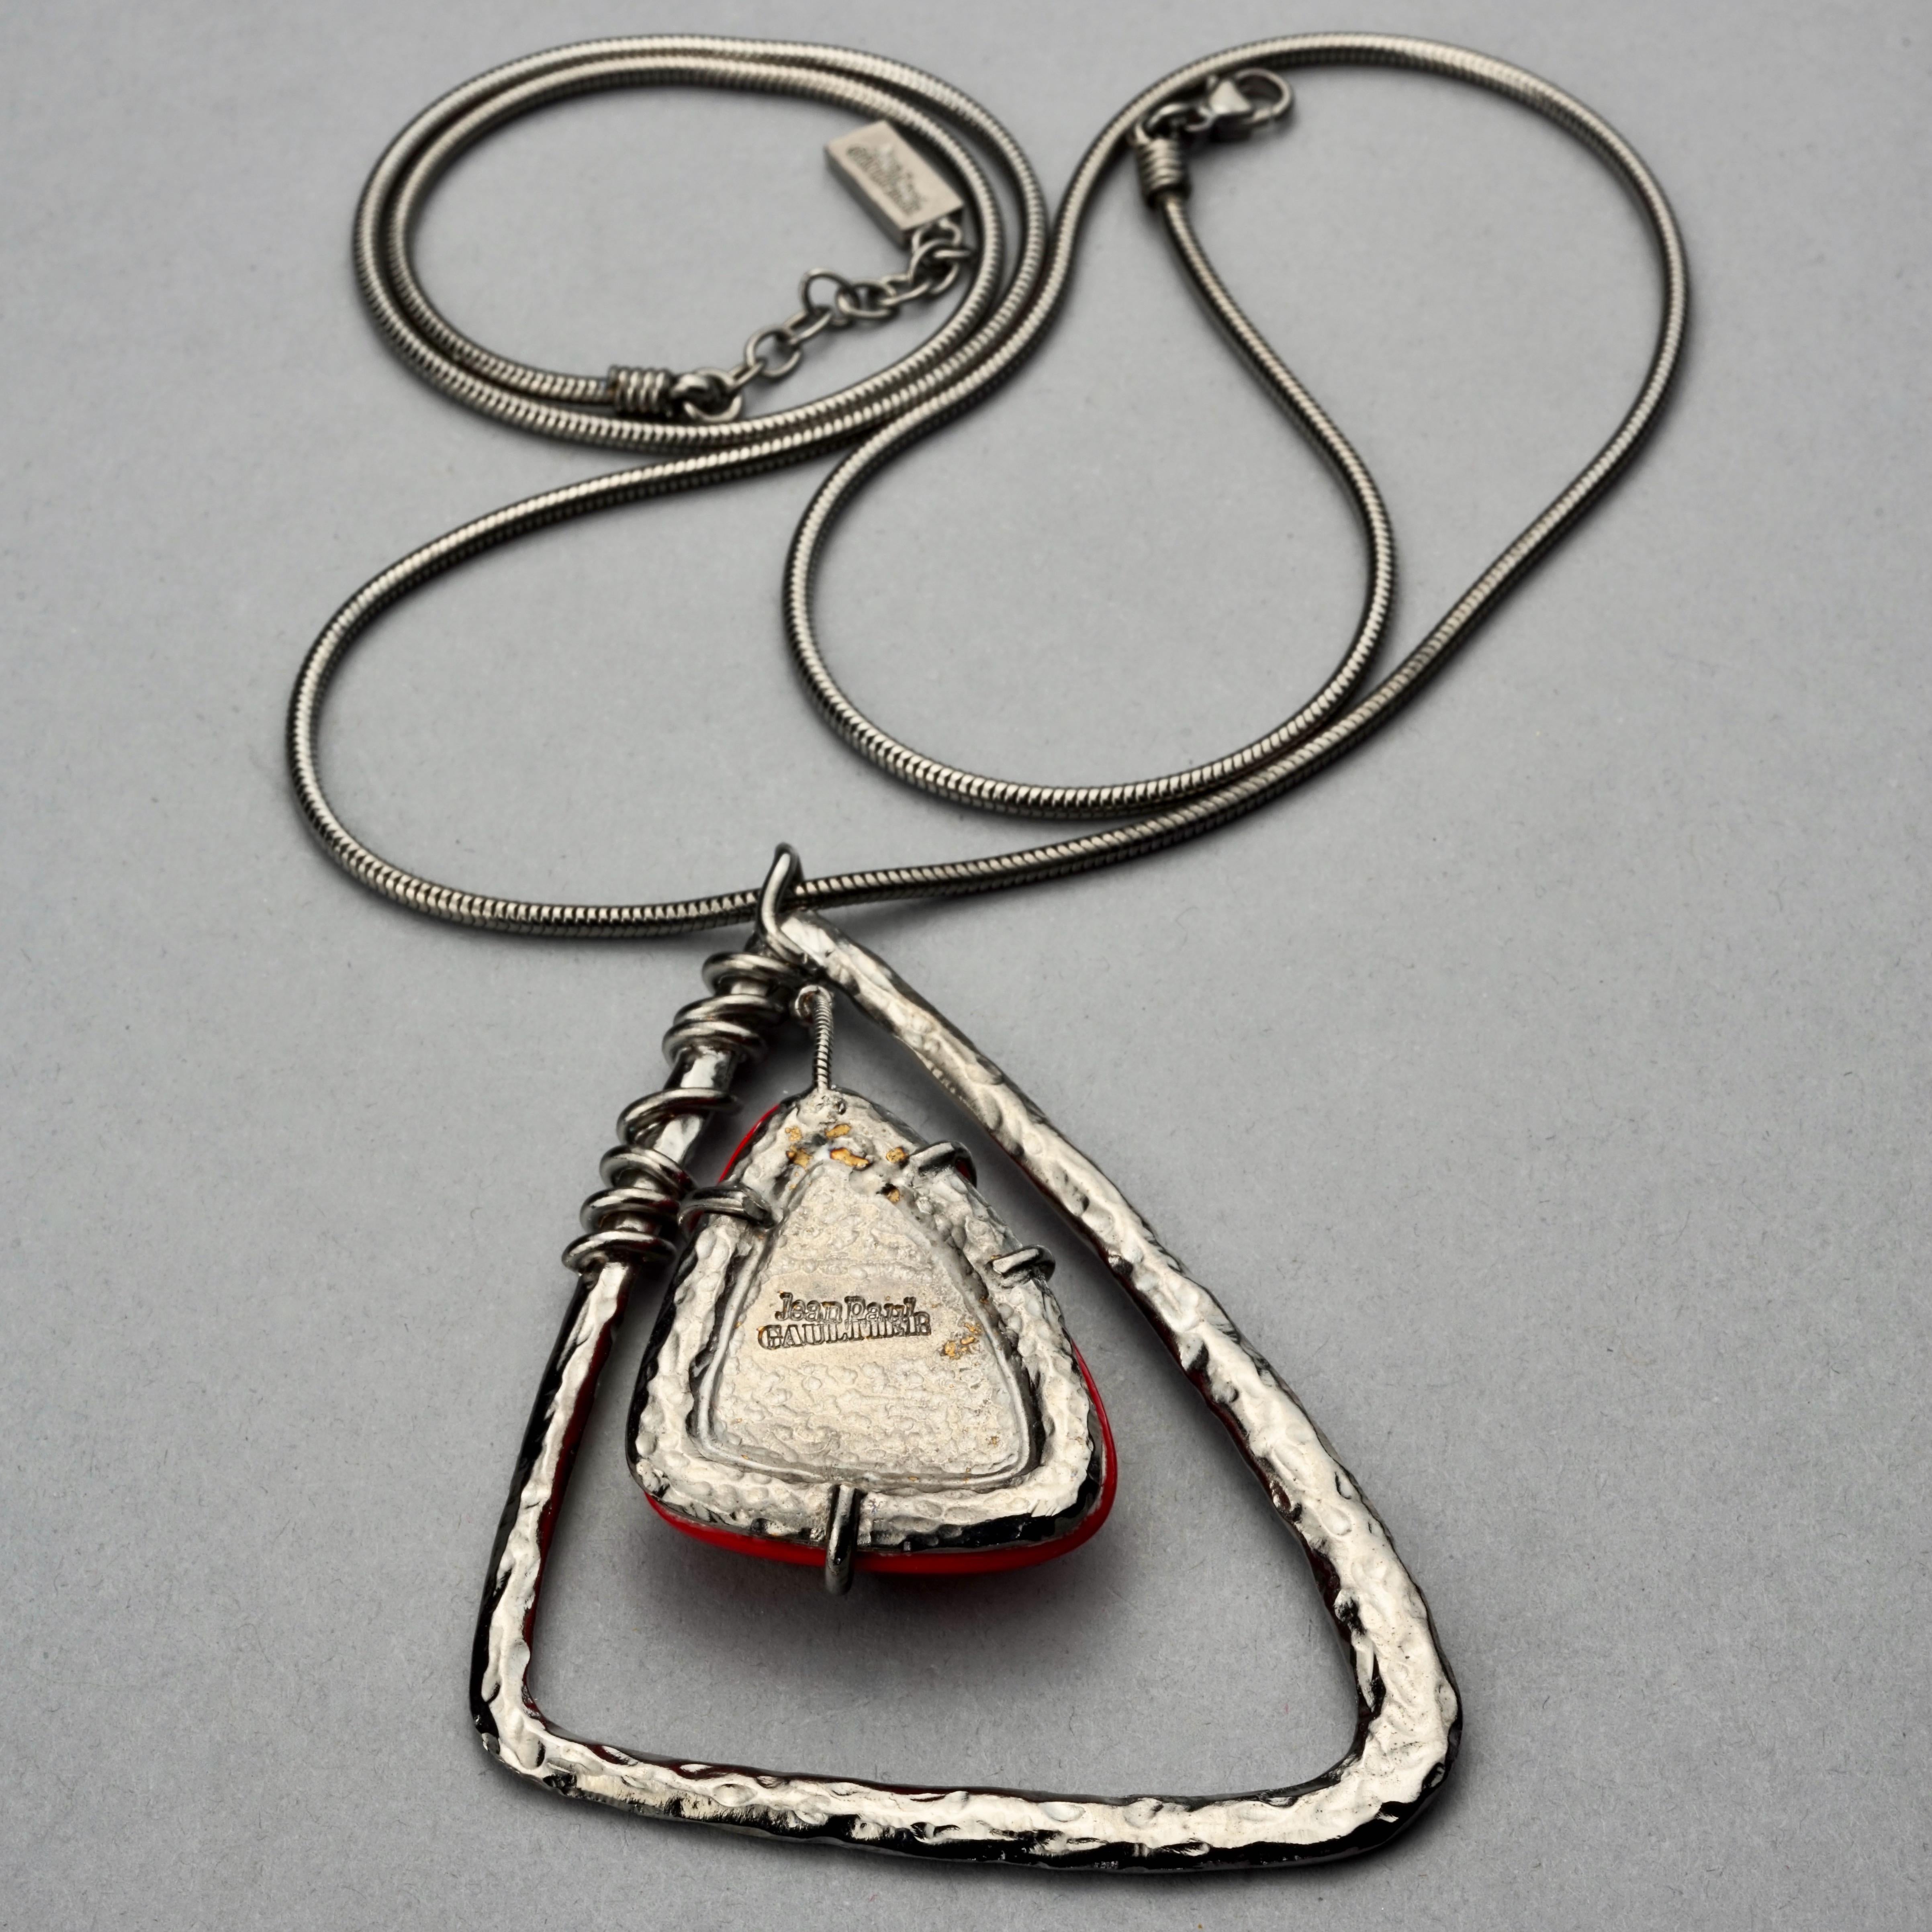 Vintage JEAN PAUL GAULTIER Modernist Triangle Glass Stone Necklace For Sale 5